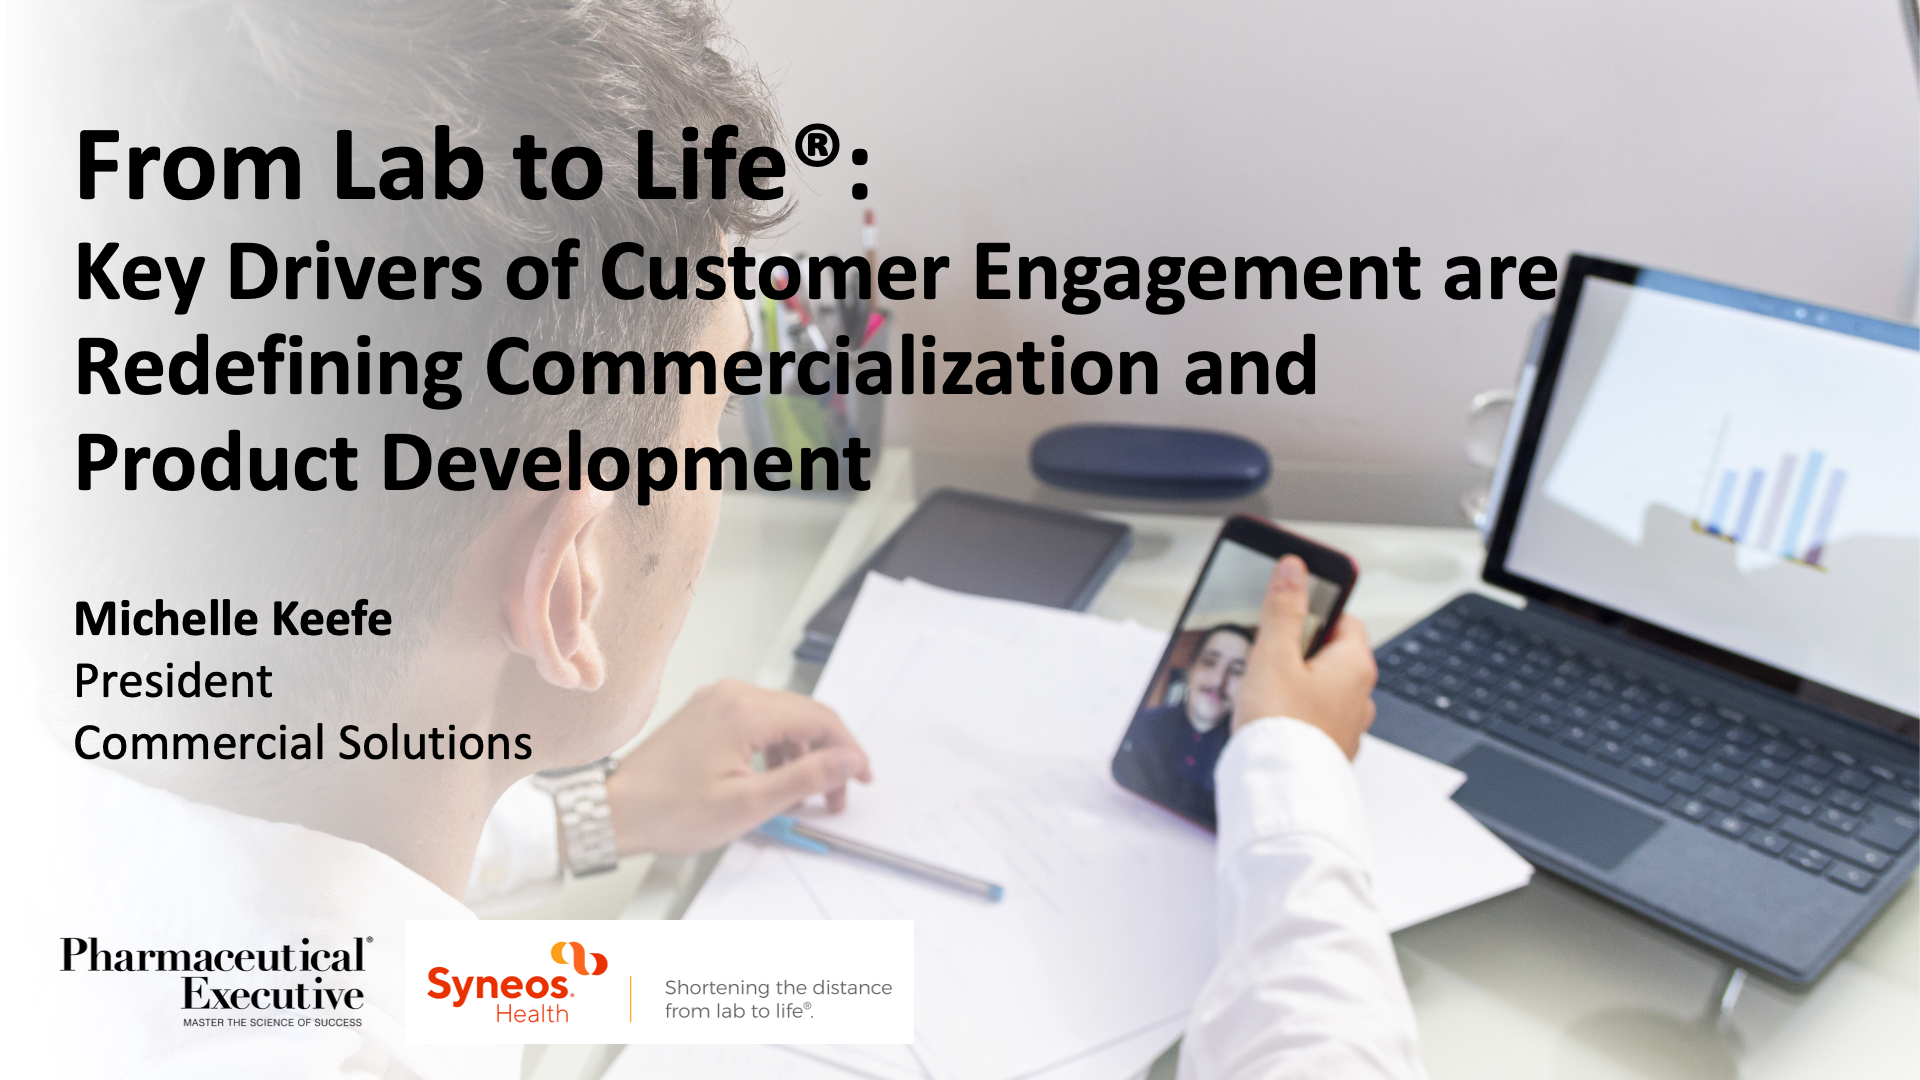 From Lab to Life: Key Drivers of Customer Engagement are Redefining Commercialization and Product Development 